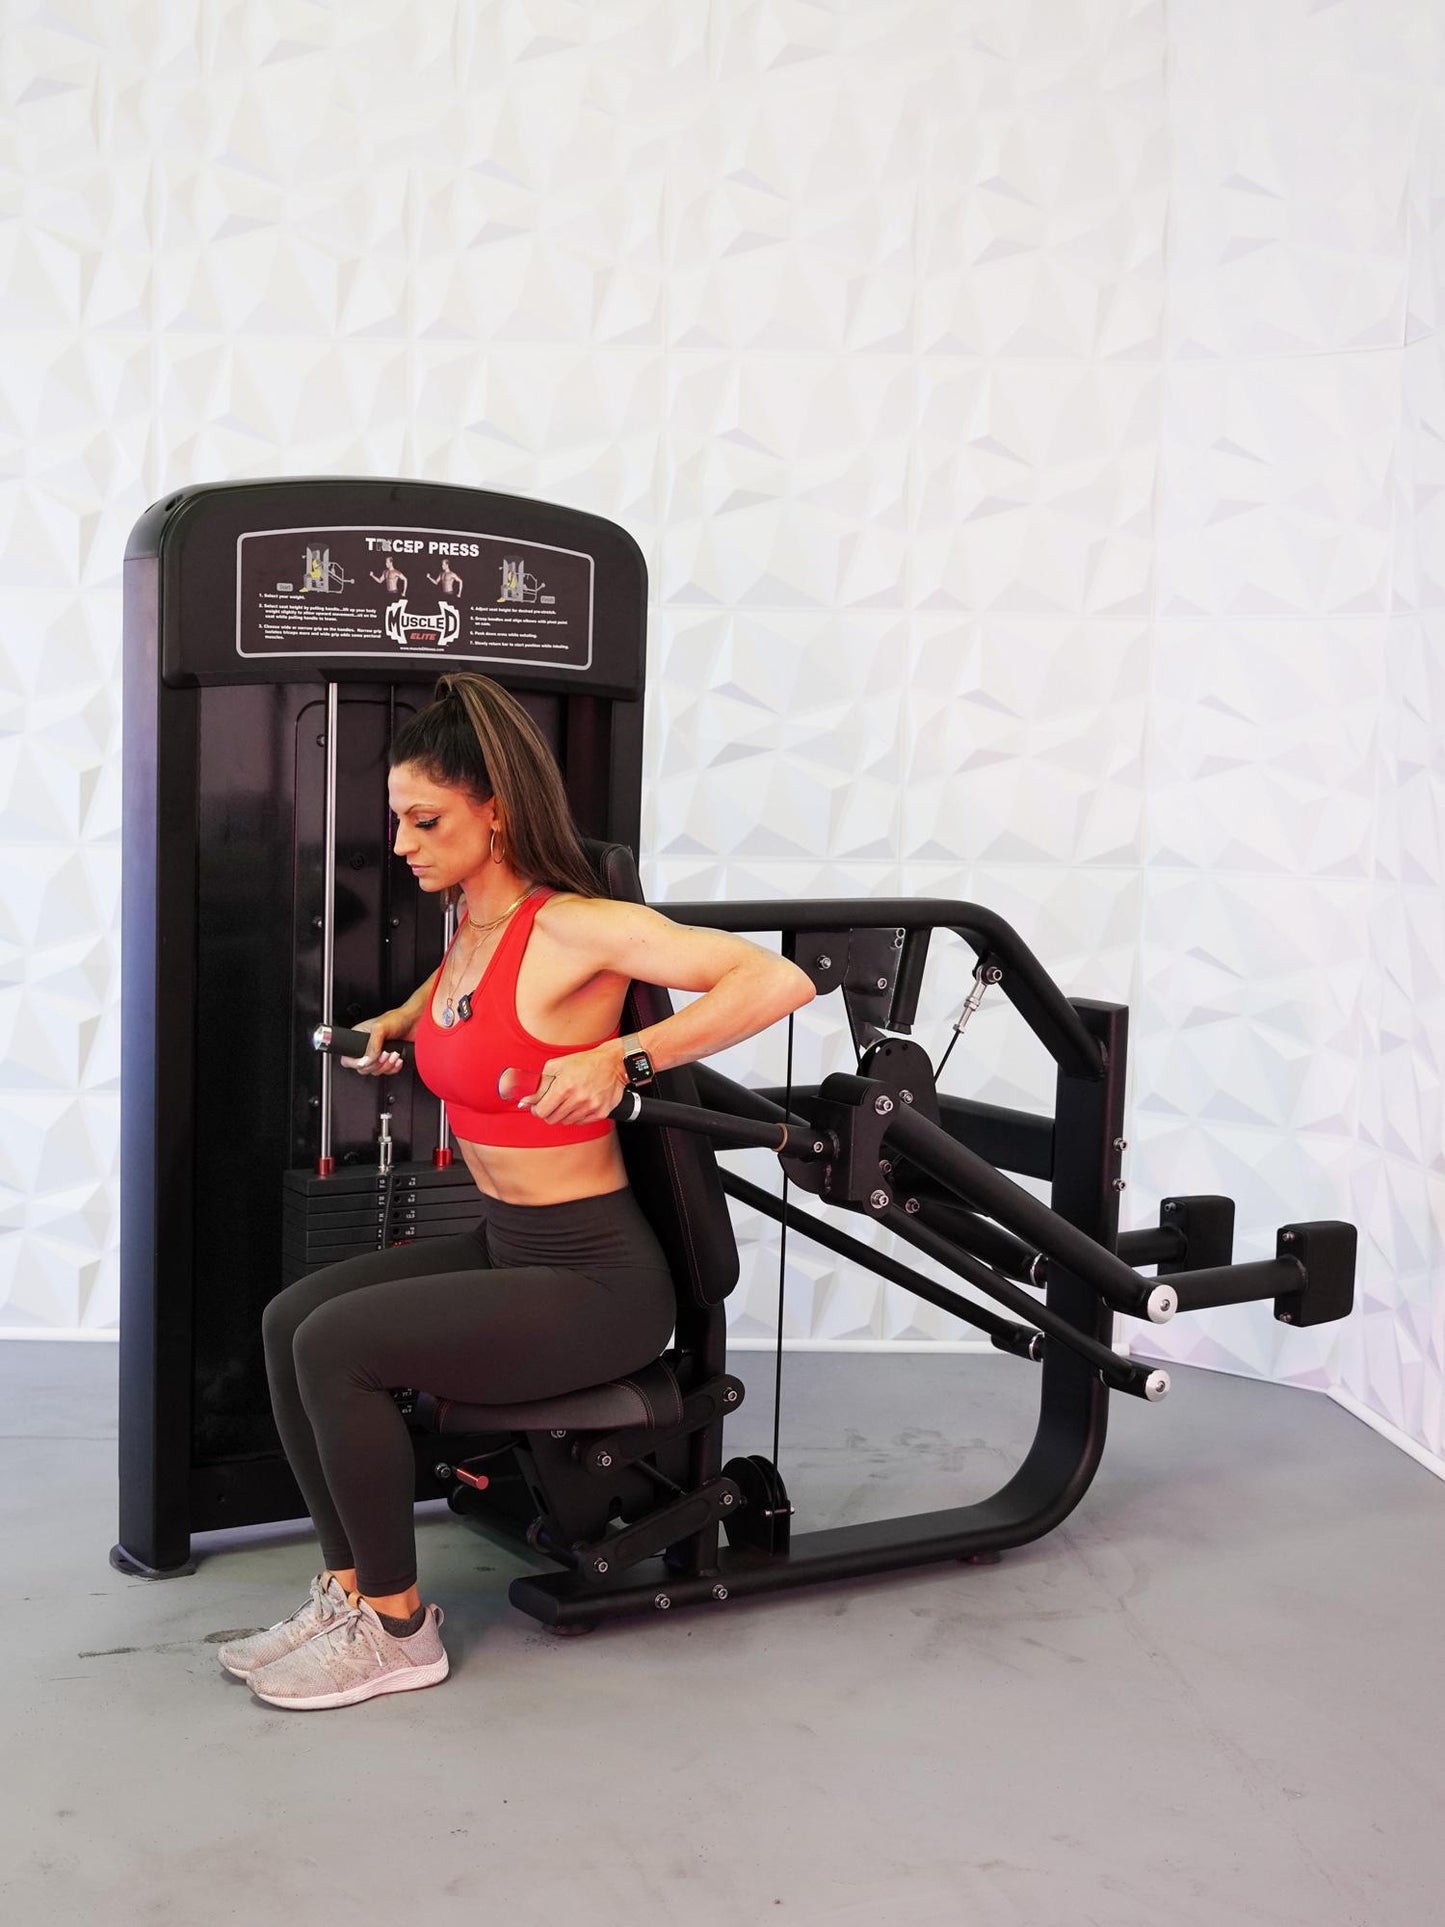 Muscle D Elite Selectorized Tricep Press